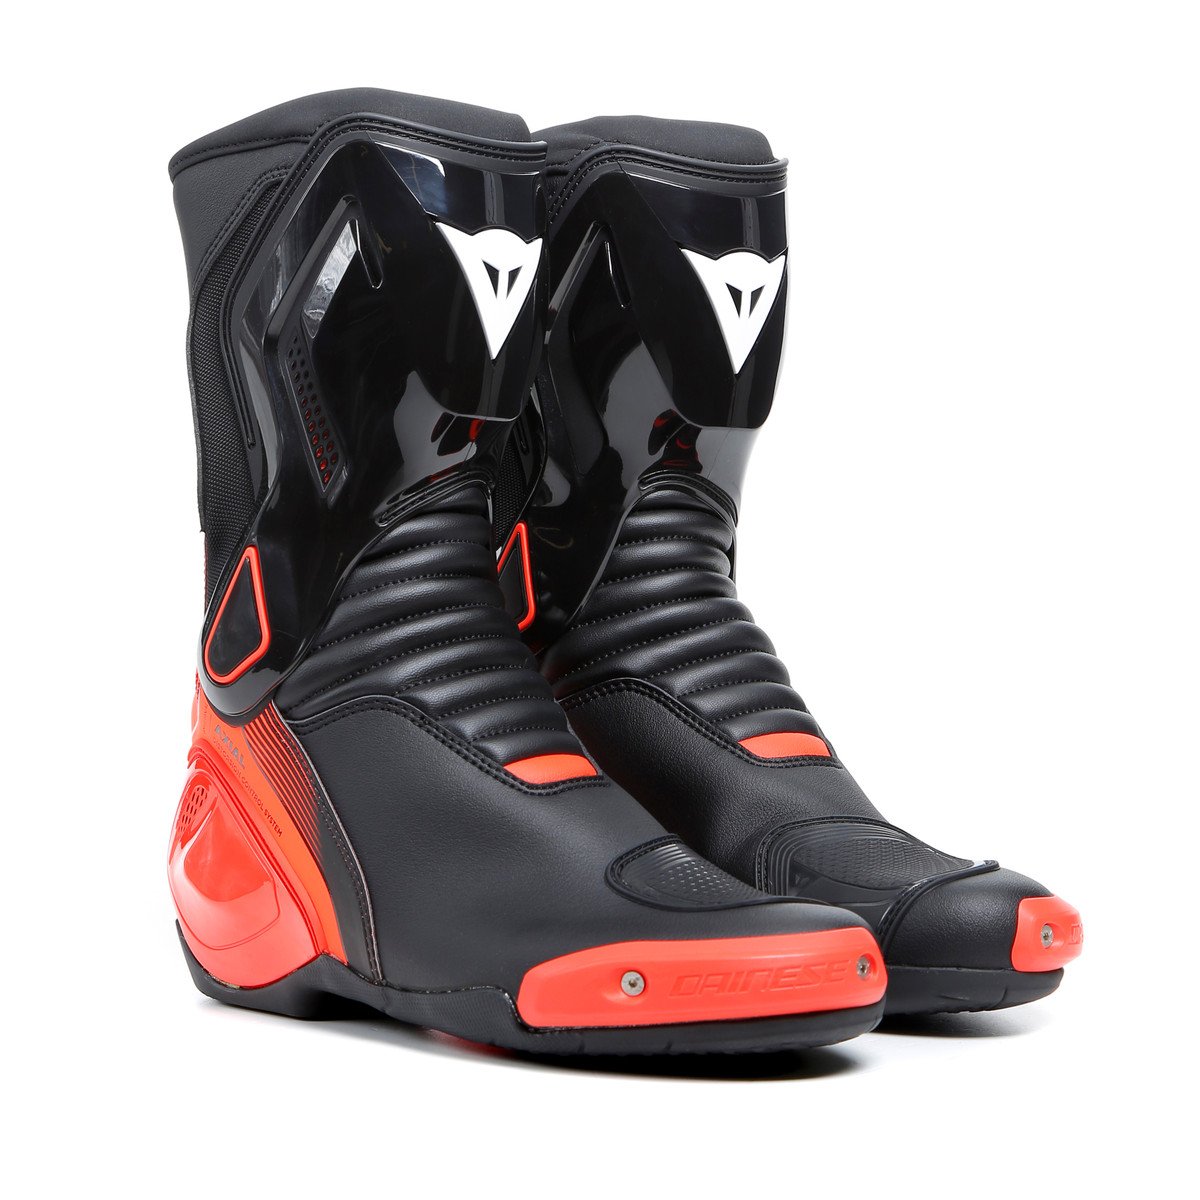 Image of Dainese Nexus 2 Boots Black Fluo Red Size 47 ID 8051019292773